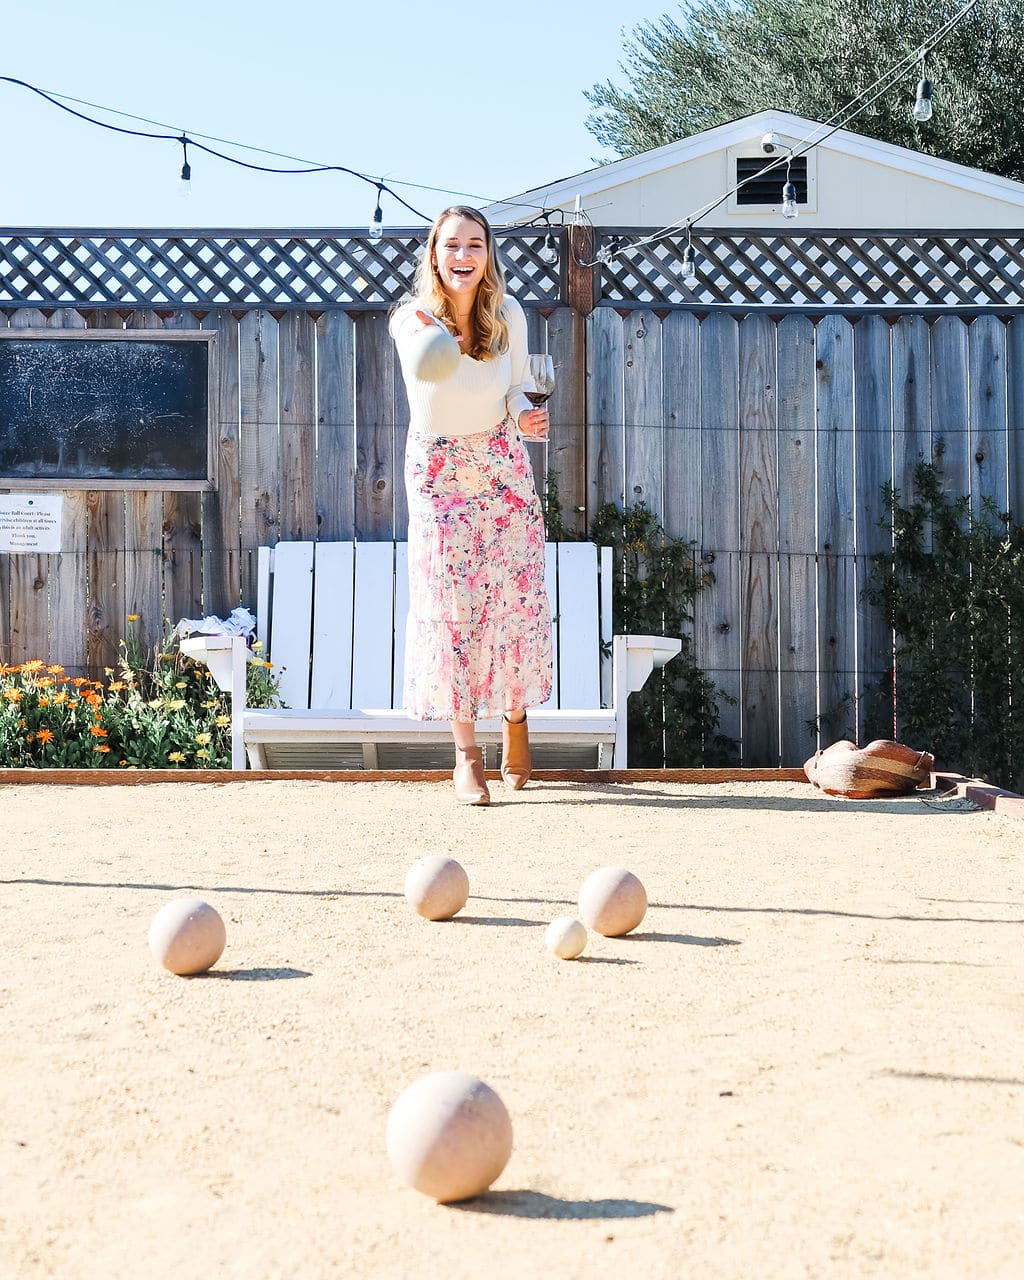 Activities to do at the Geyserville Inn, play bocce ball while drinking wine